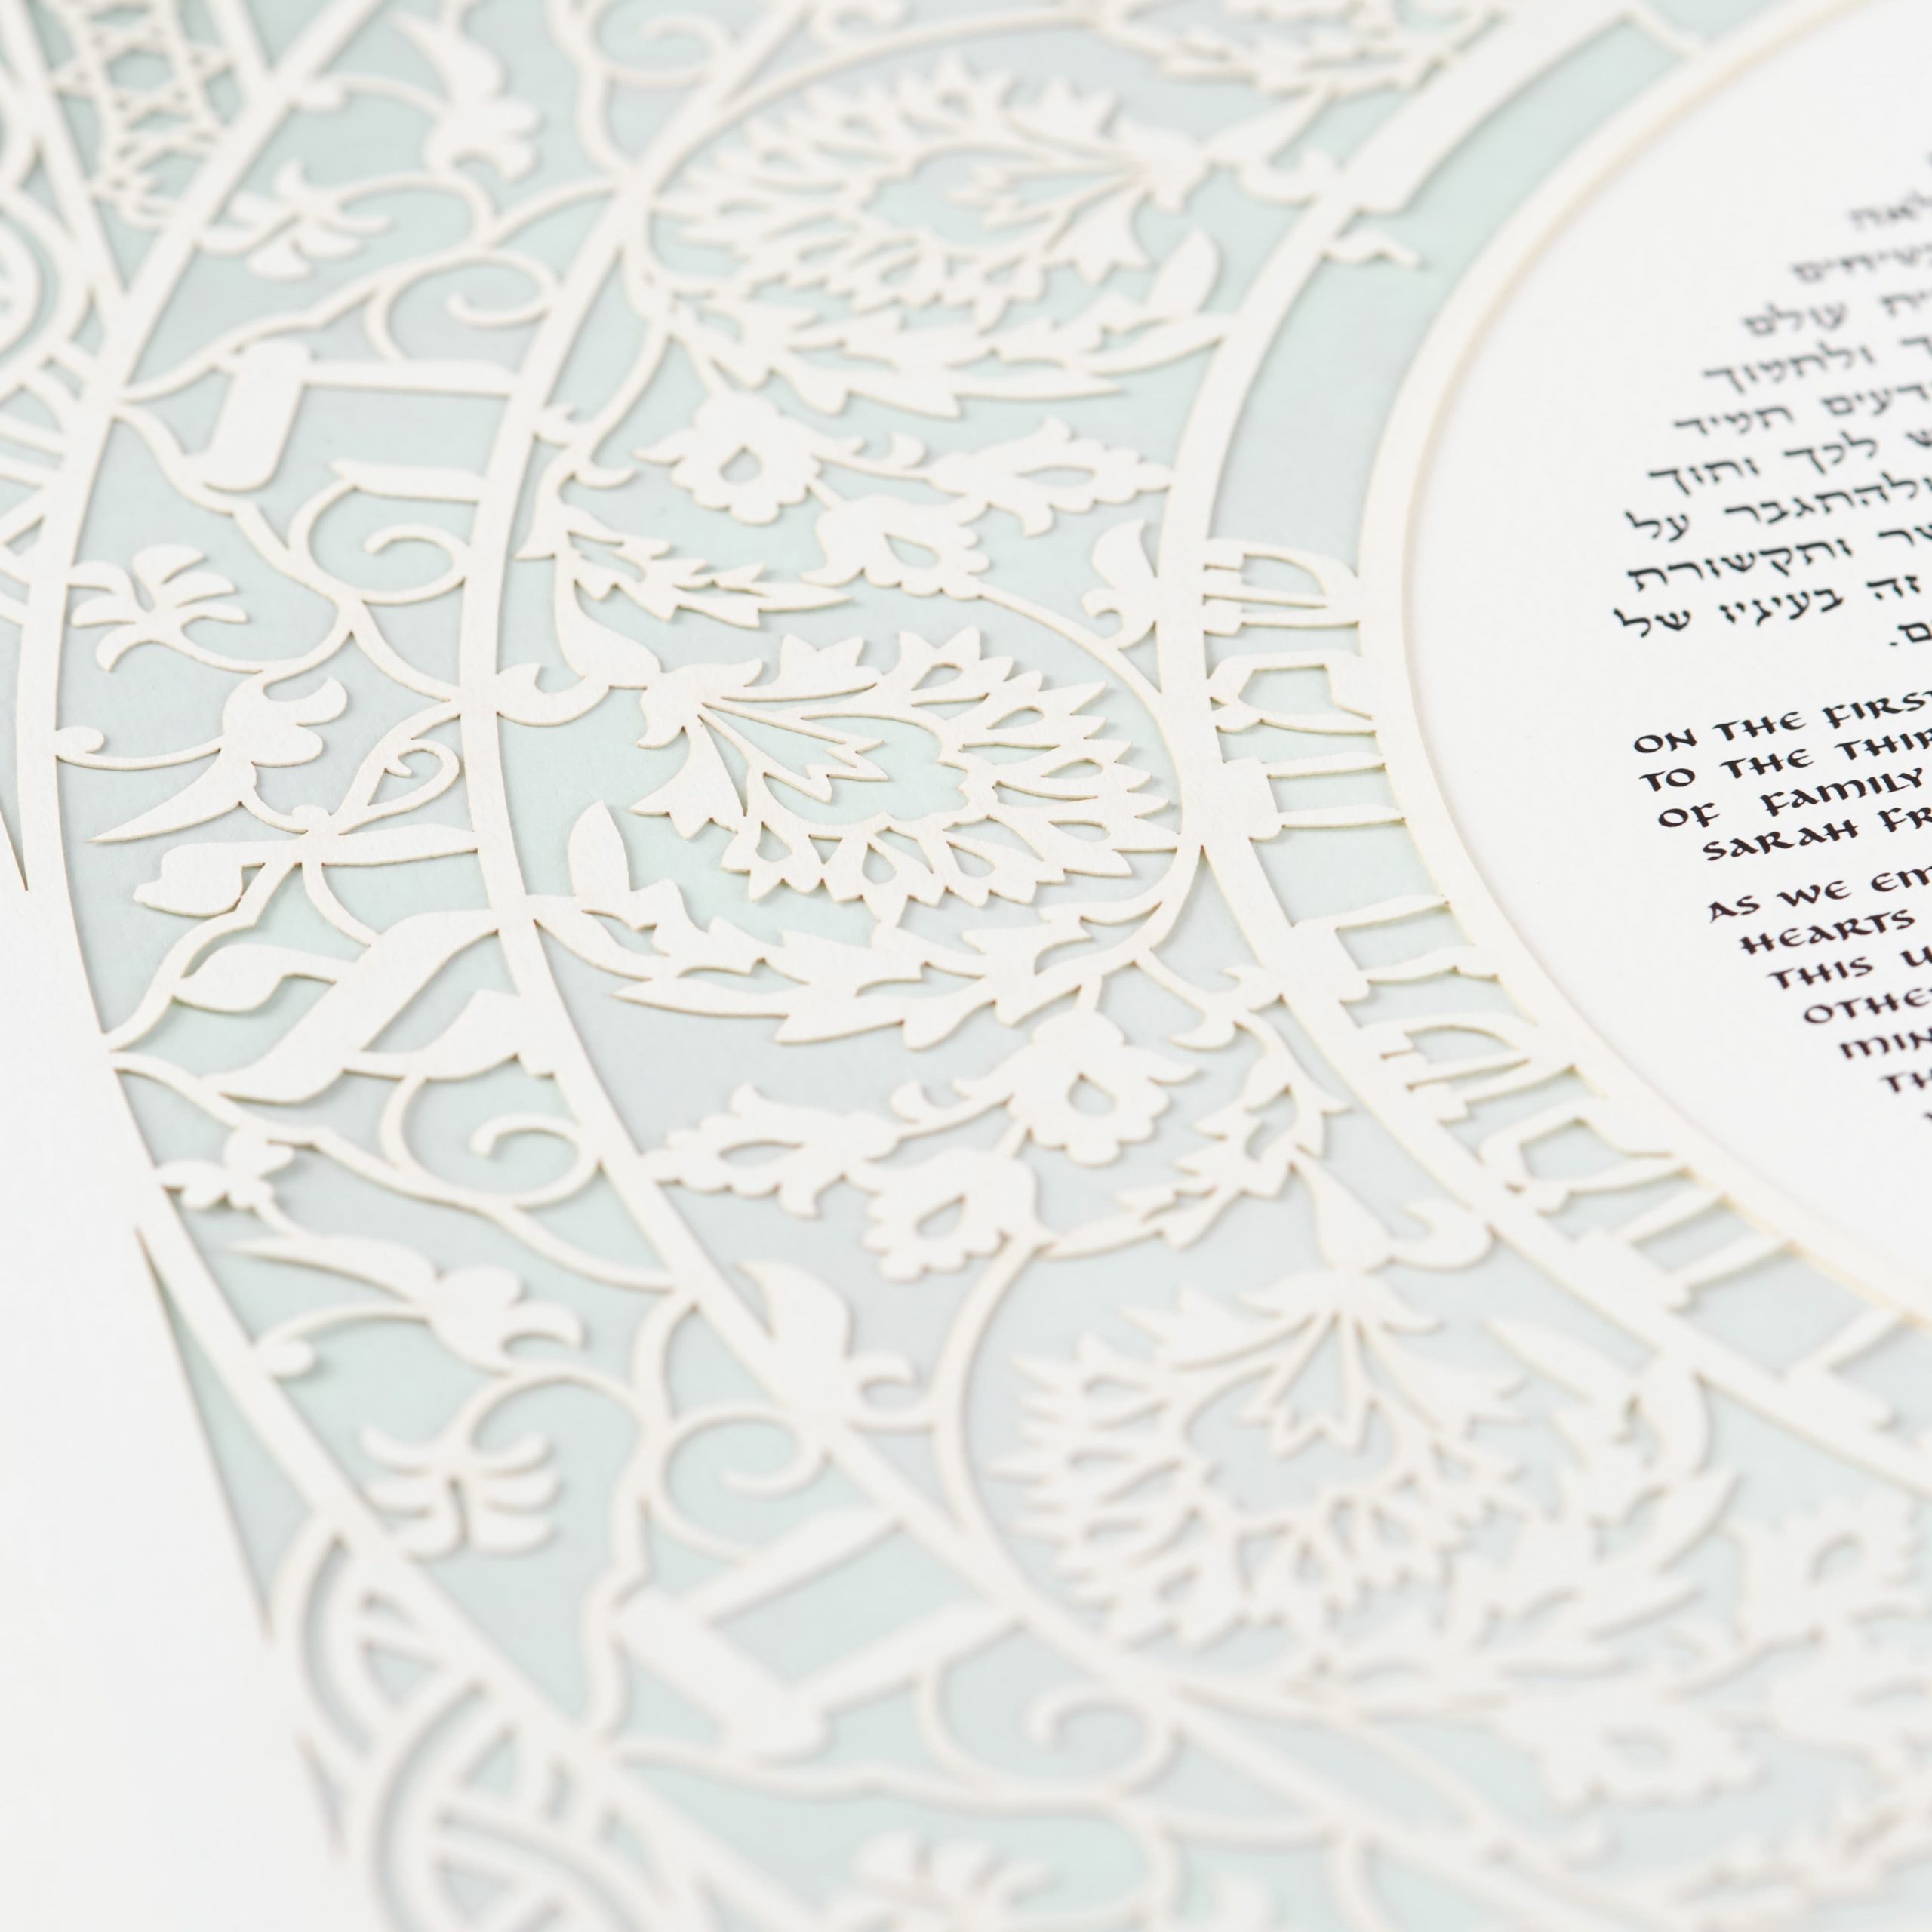 Ketubah trends to look out for in 2020